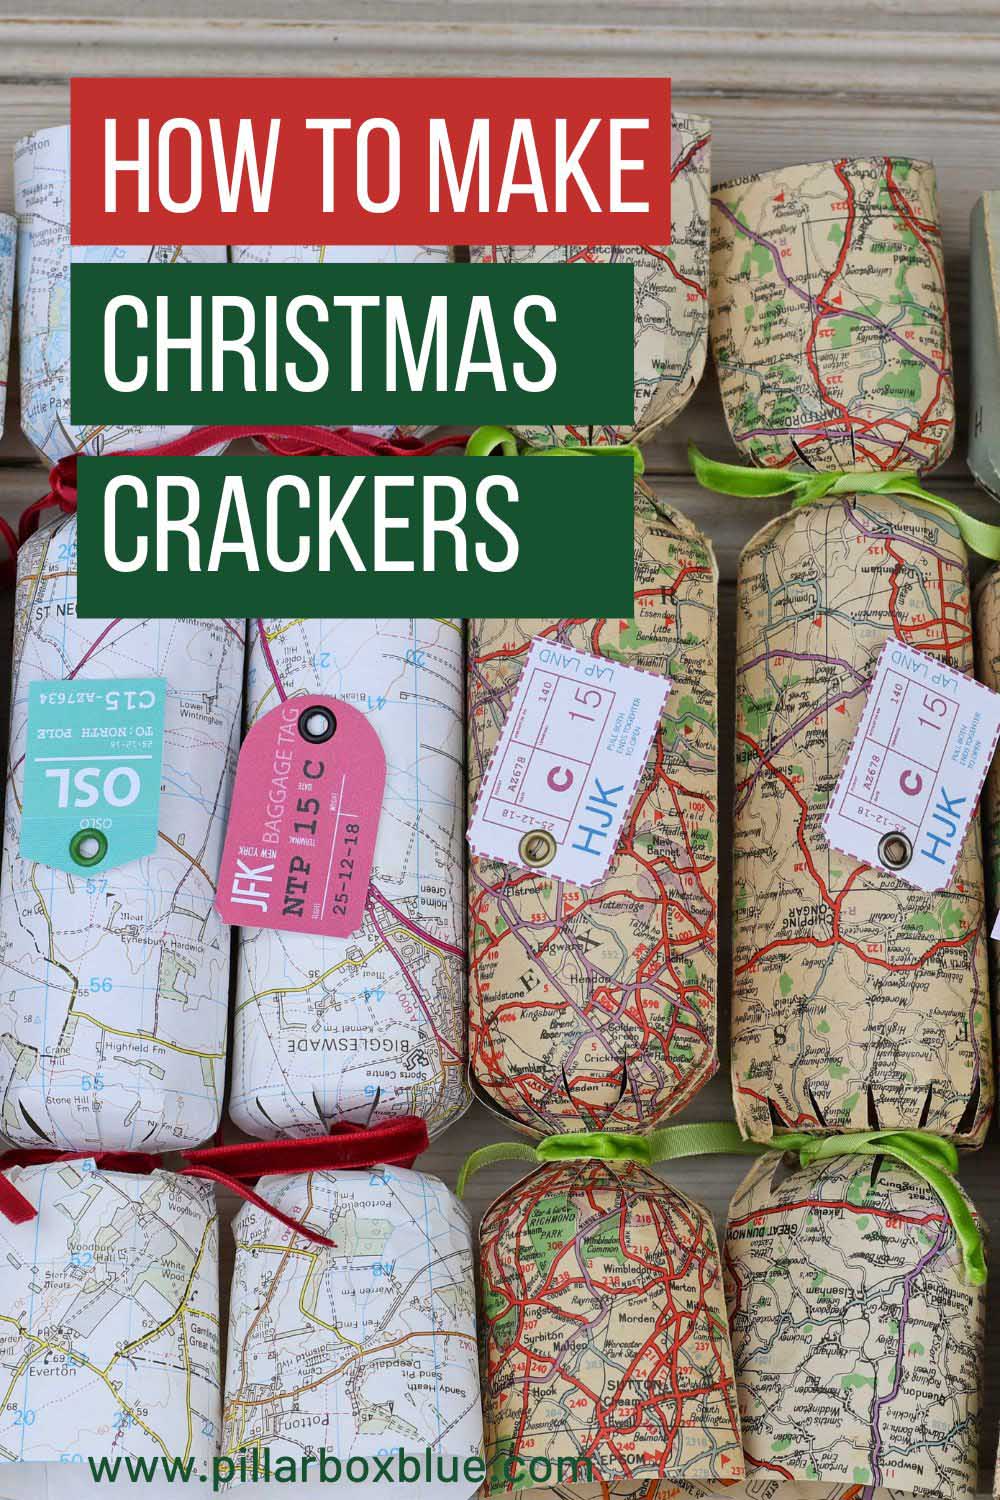 how to make christmas crackers with repurposed papers such as maps